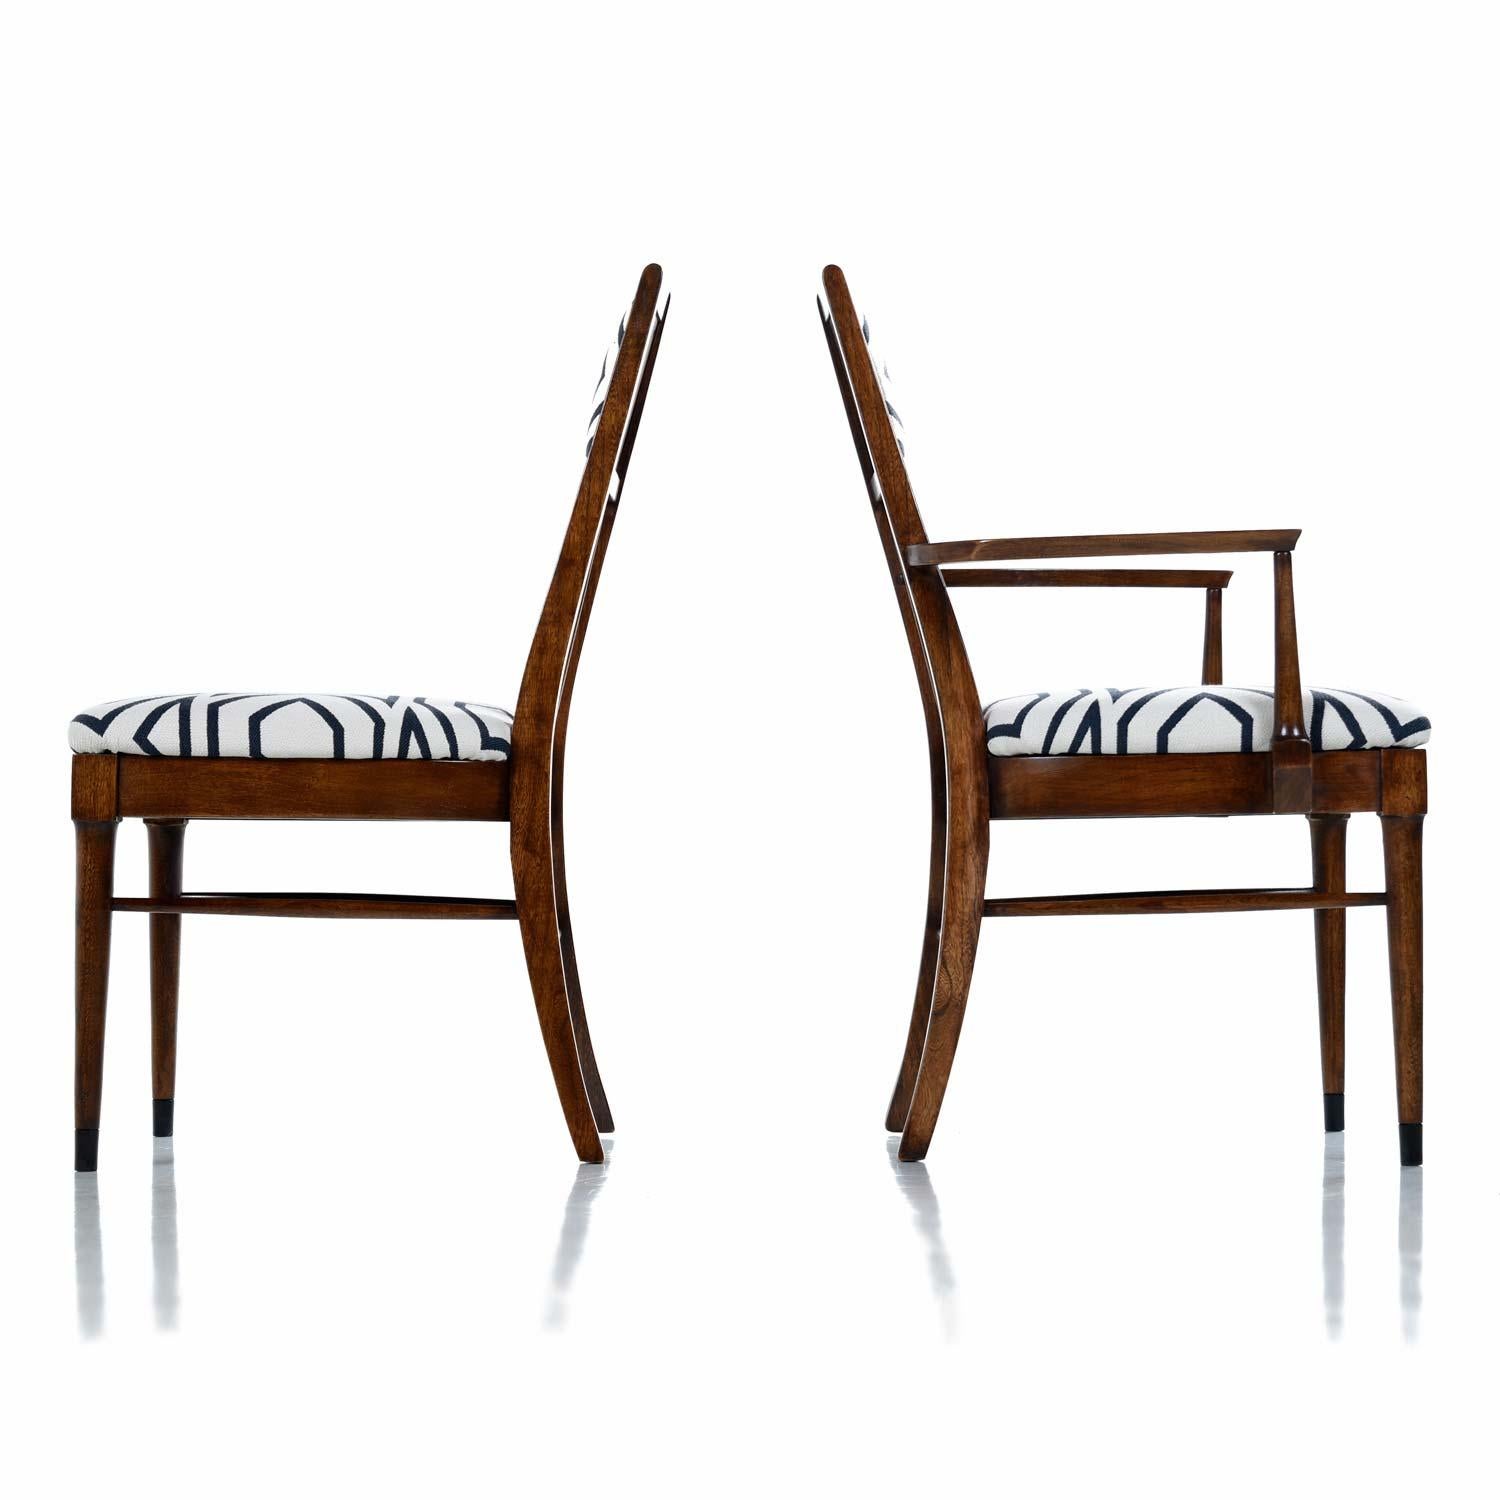 American Solid Walnut Mid-Century Modern Chairs in Navy and Ivory Fabric